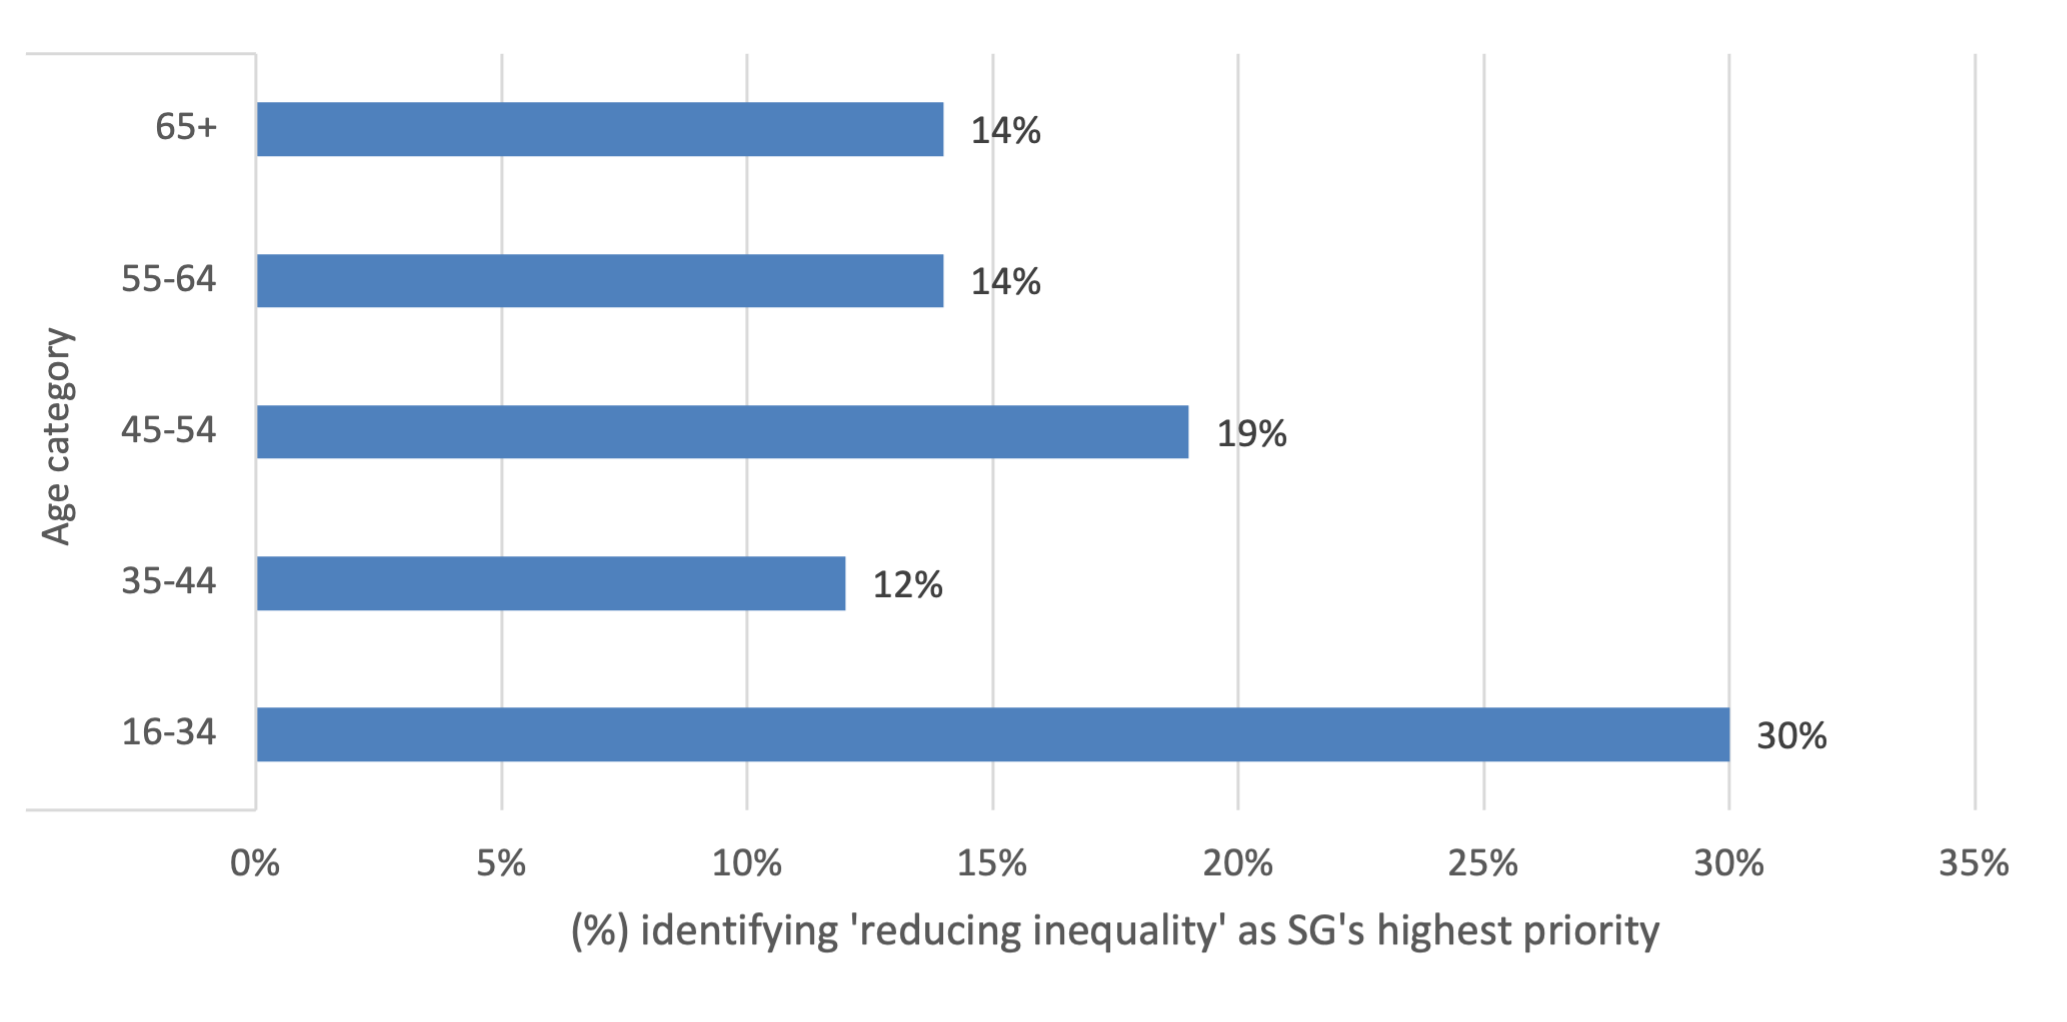 Bar chart visualising the proportion of respondents who identified reducing inequality as their highest priority for the Scottish Government, split by age group. The chart suggests that younger people (aged 16 to 34) are the most likely to select this as their highest priority.